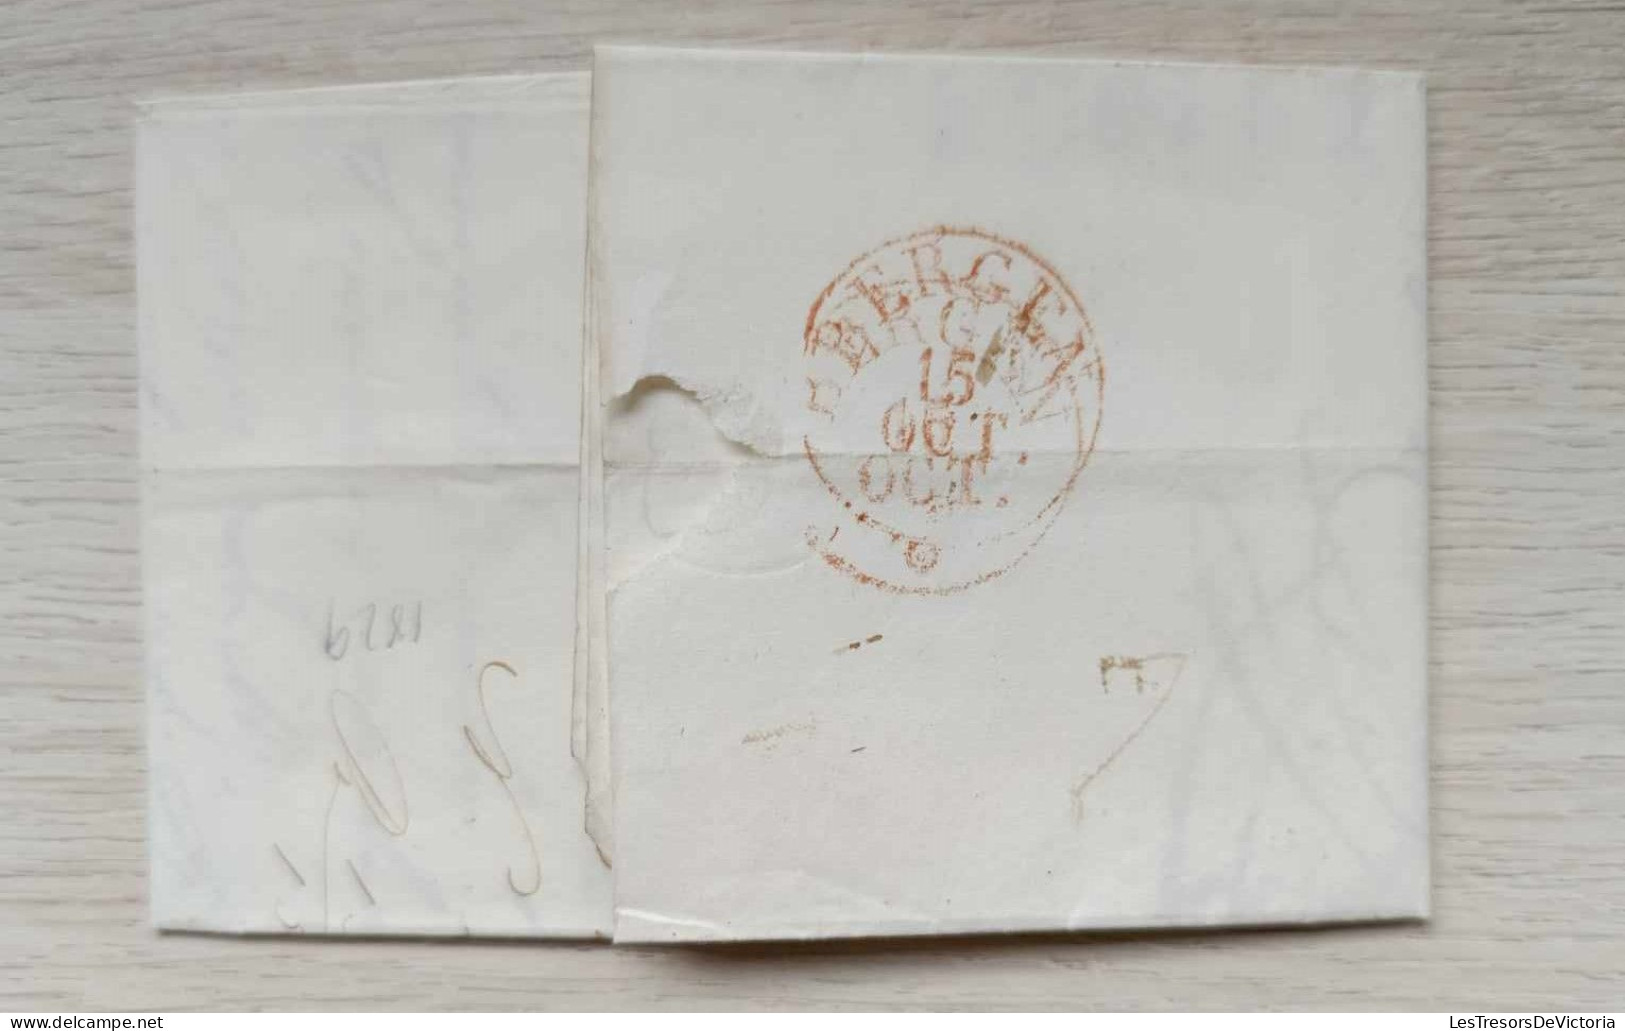 Letter Mailed On October 13th 1829 From Gent To Hornu  - Weight Indication "16" Wigtjes - 1815-1830 (Hollandse Tijd)